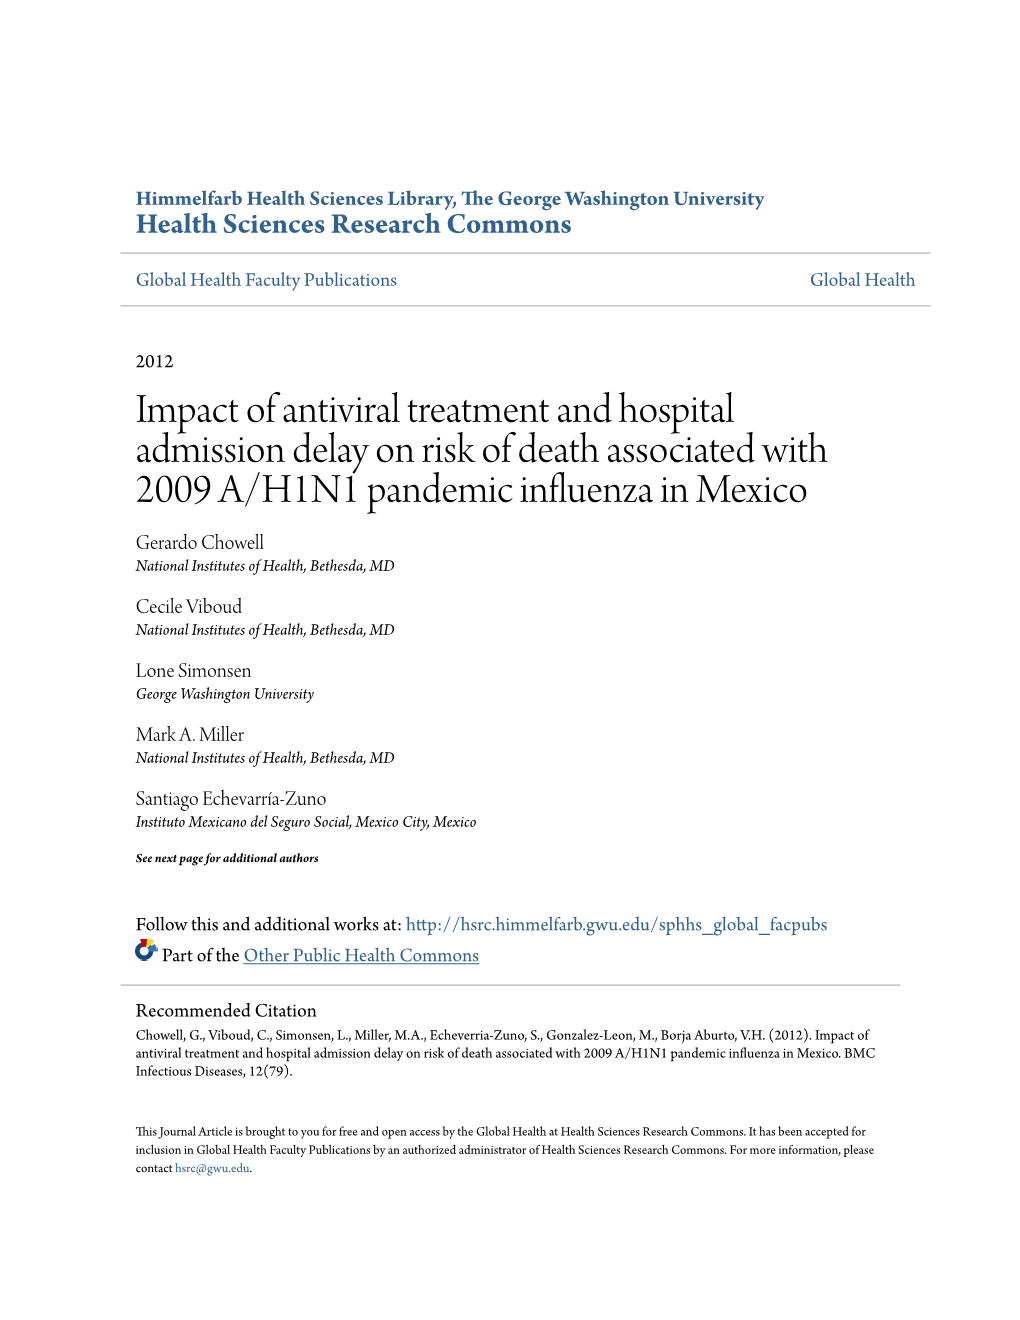 Impact of Antiviral Treatment and Hospital Admission Delay on Risk Of